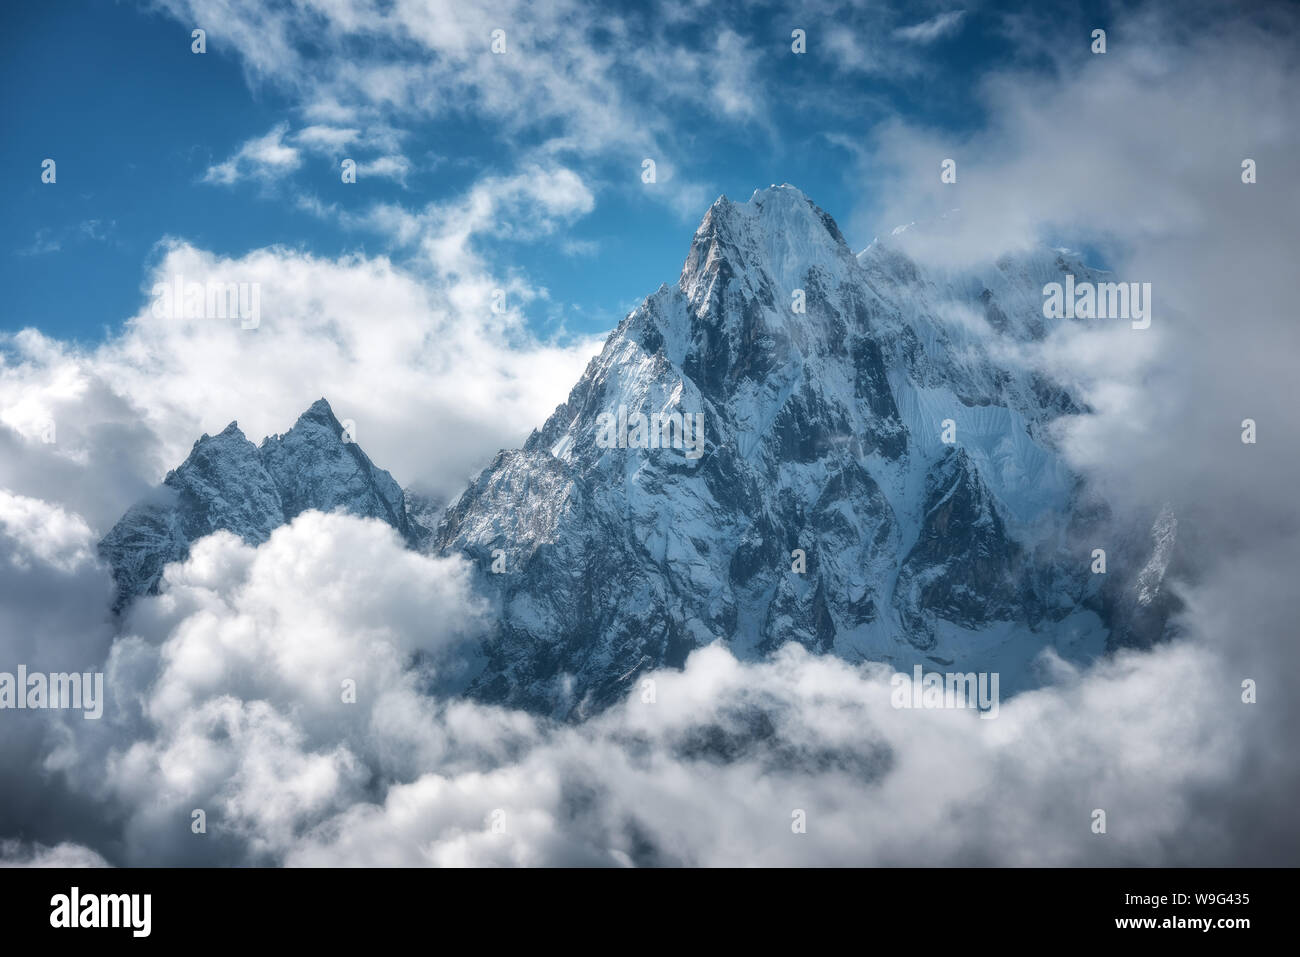 Manaslu mountain with snowy peak in clouds in sunny bright day Stock Photo